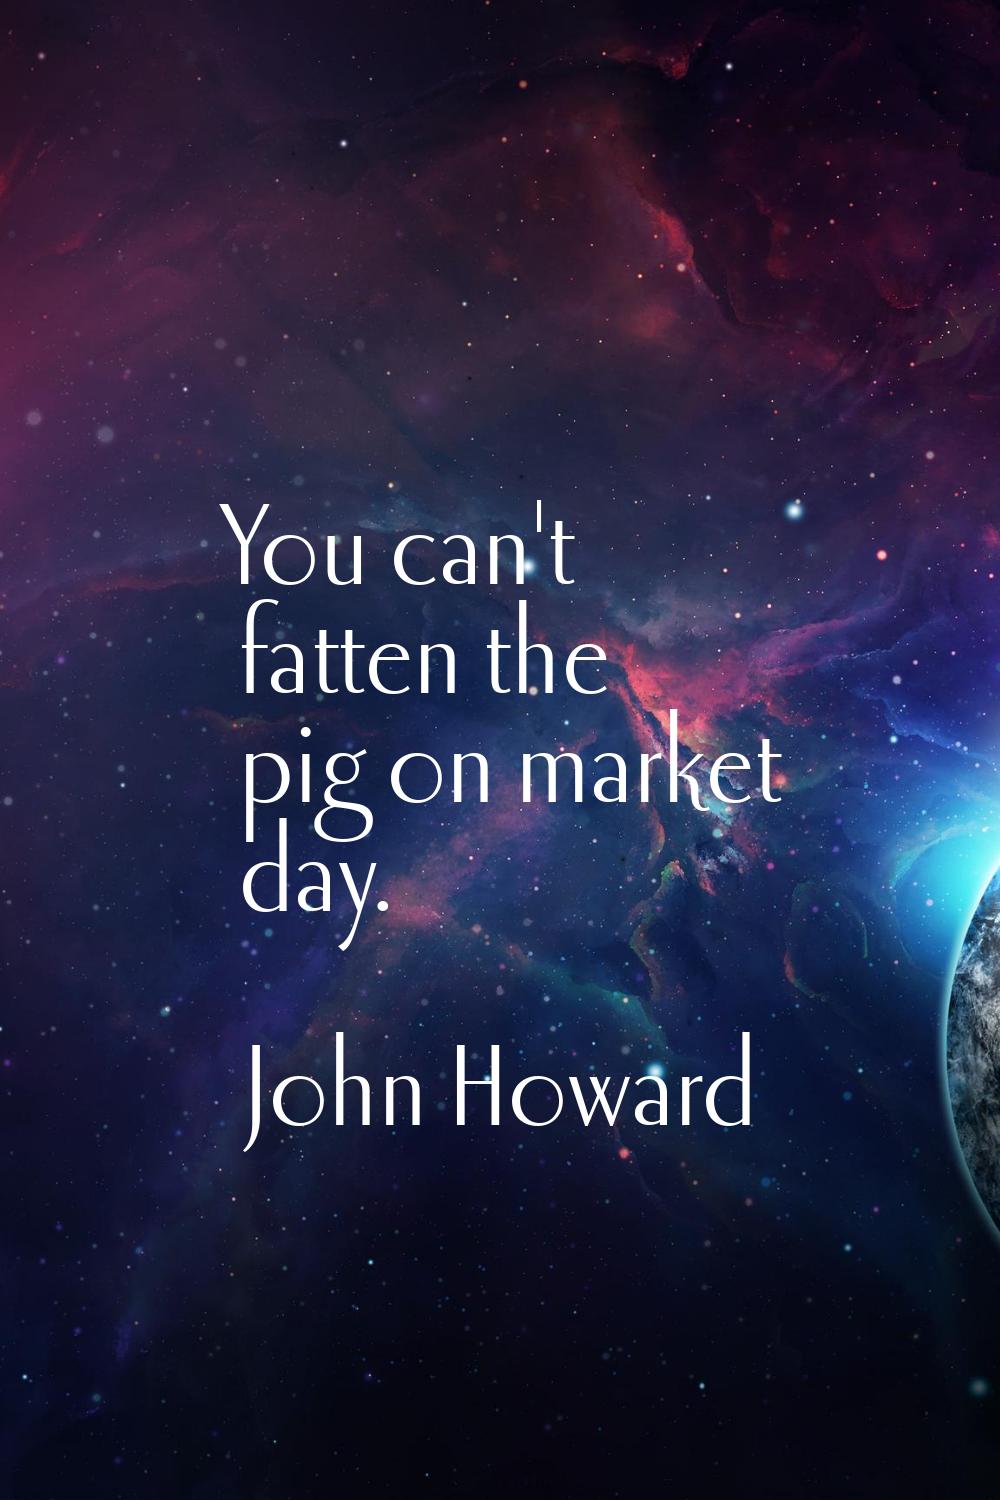 You can't fatten the pig on market day.